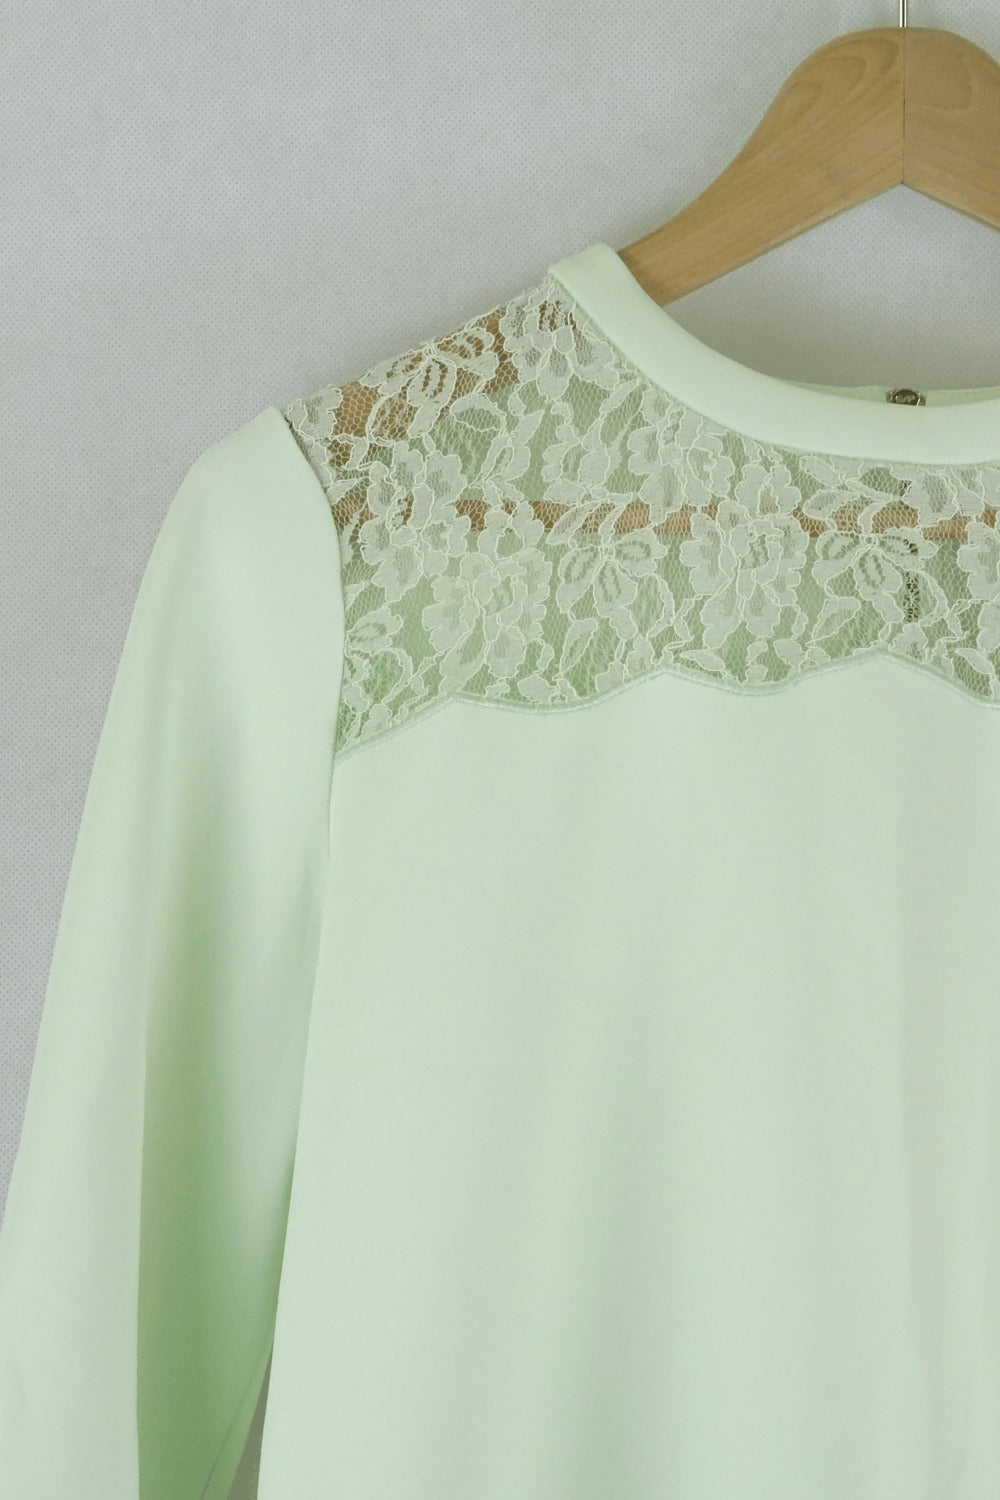 Ted baker green lace jumper 2